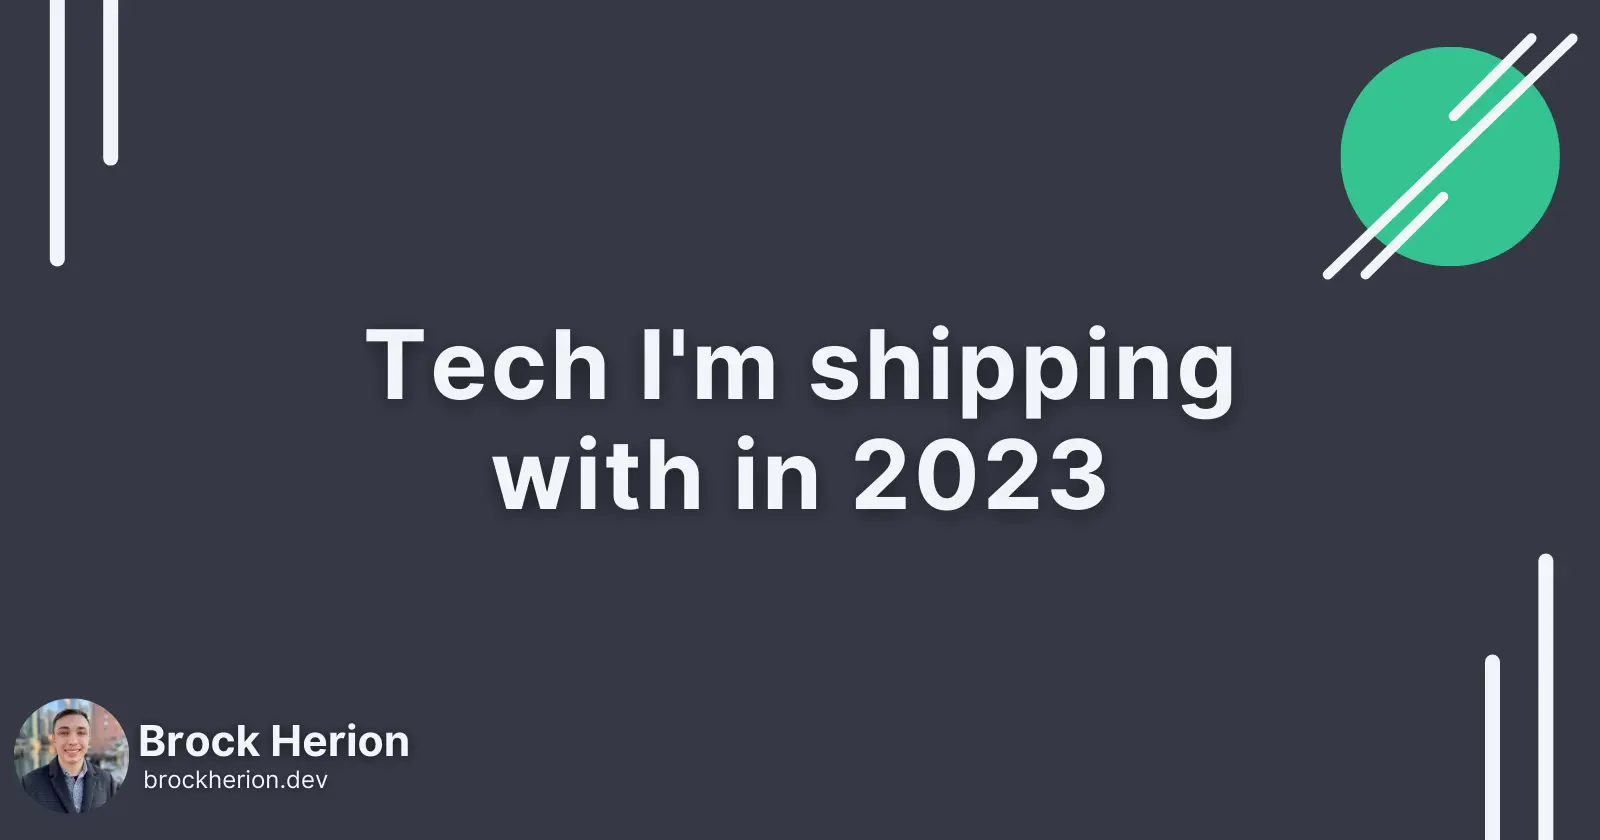 Tech I'm shipping with in 2023